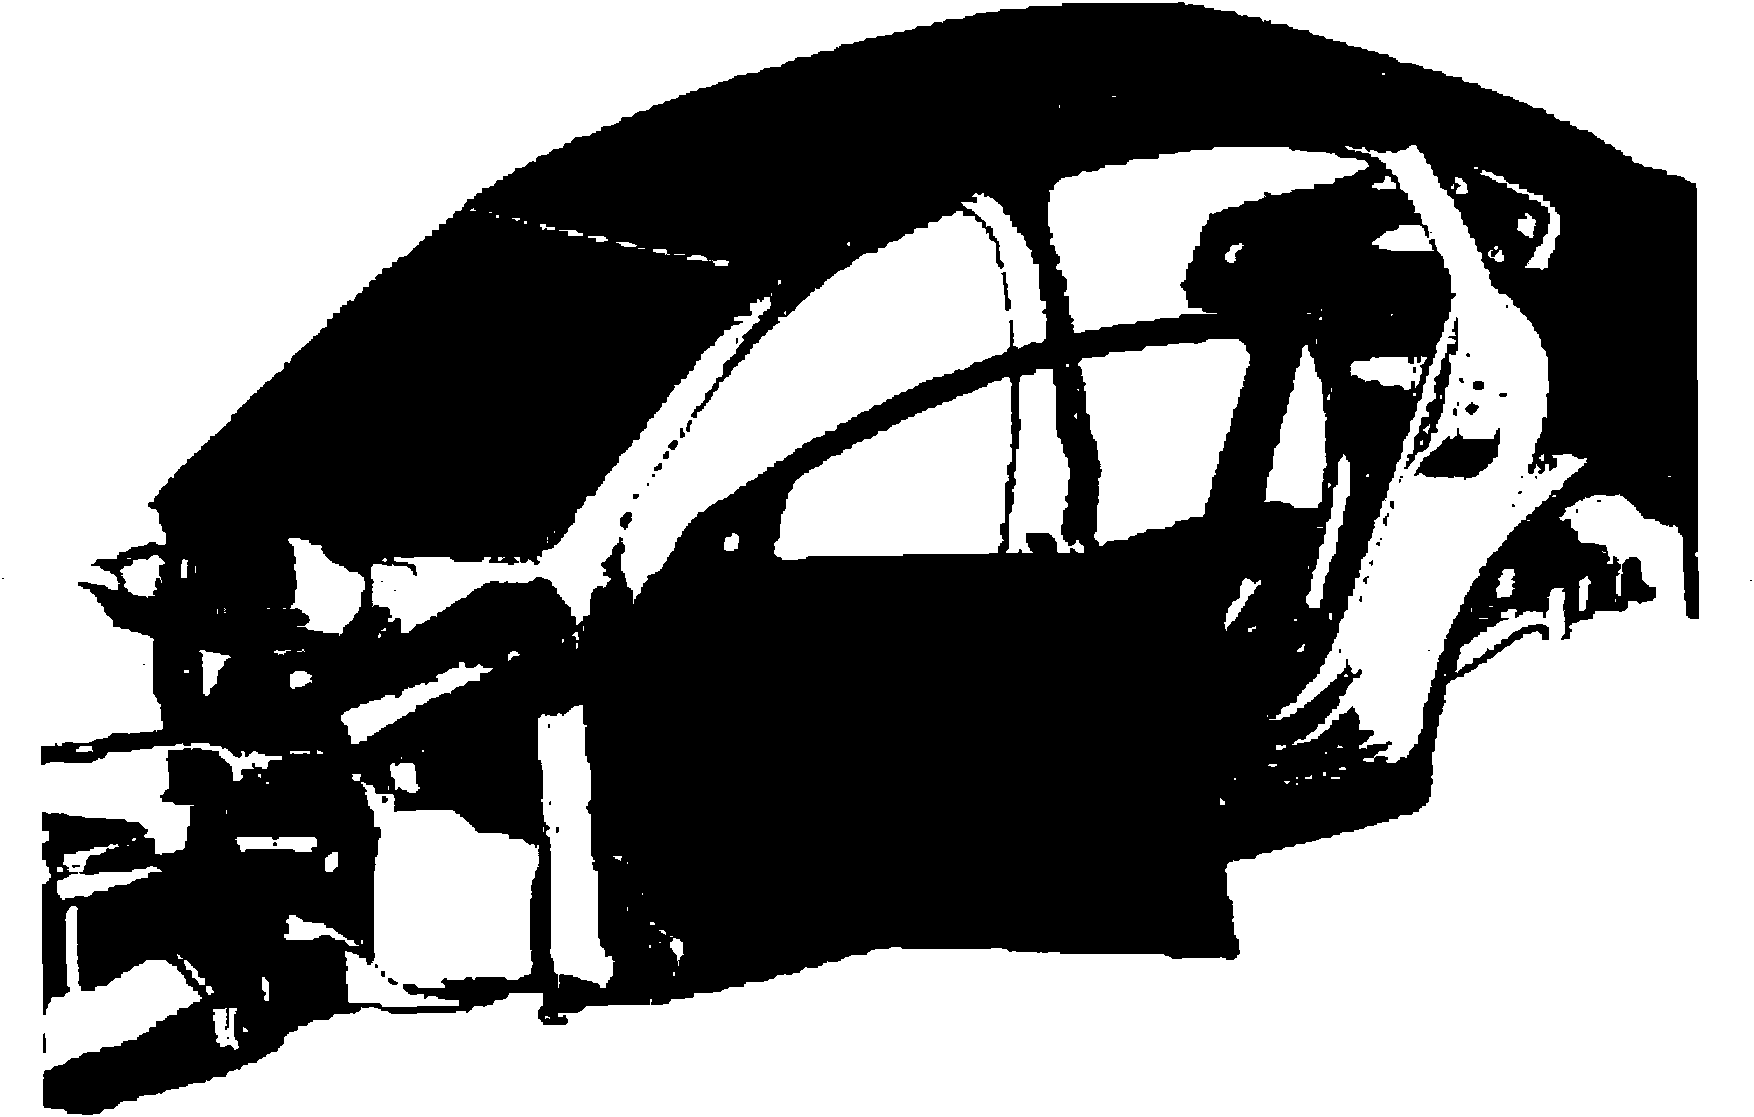 Optimization design method for sagging problem of car door based on CAE (Computer Aided Engineering) structural analysis